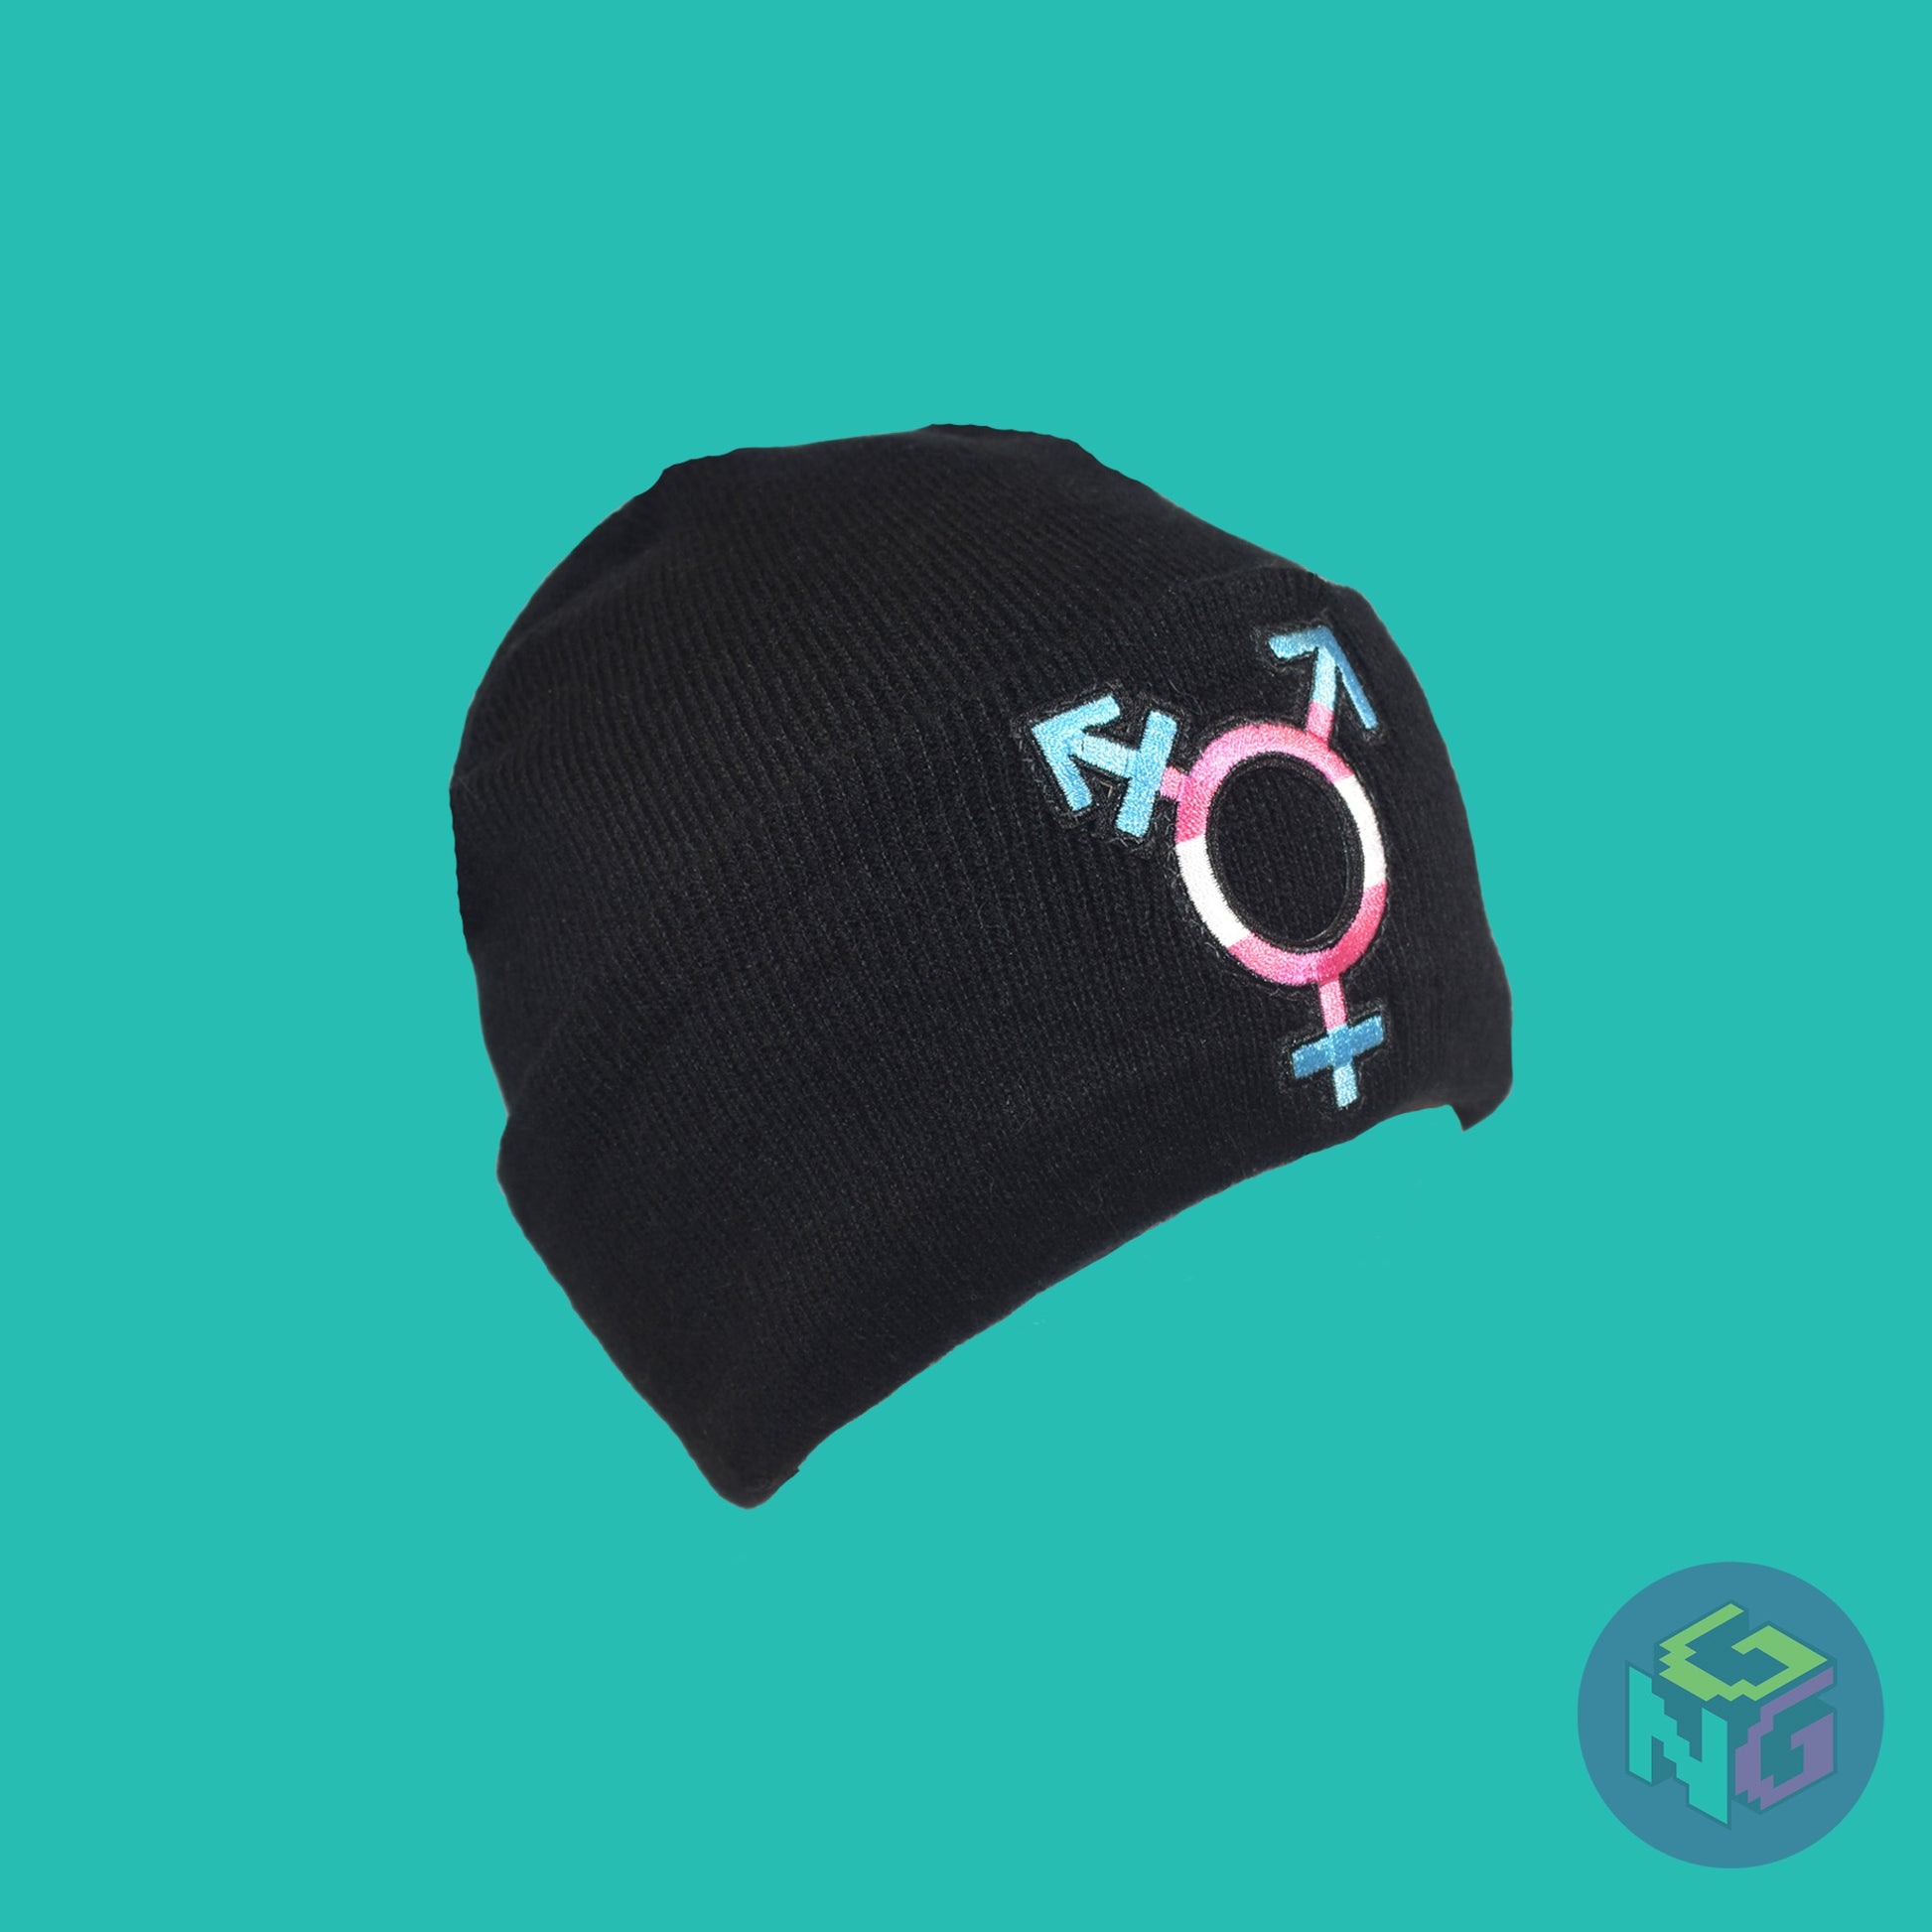 Black knit fabric beanie with the transgender symbol in blue, pink, and white on the front. It is stretched and seen in 3/4 view on a mint green background